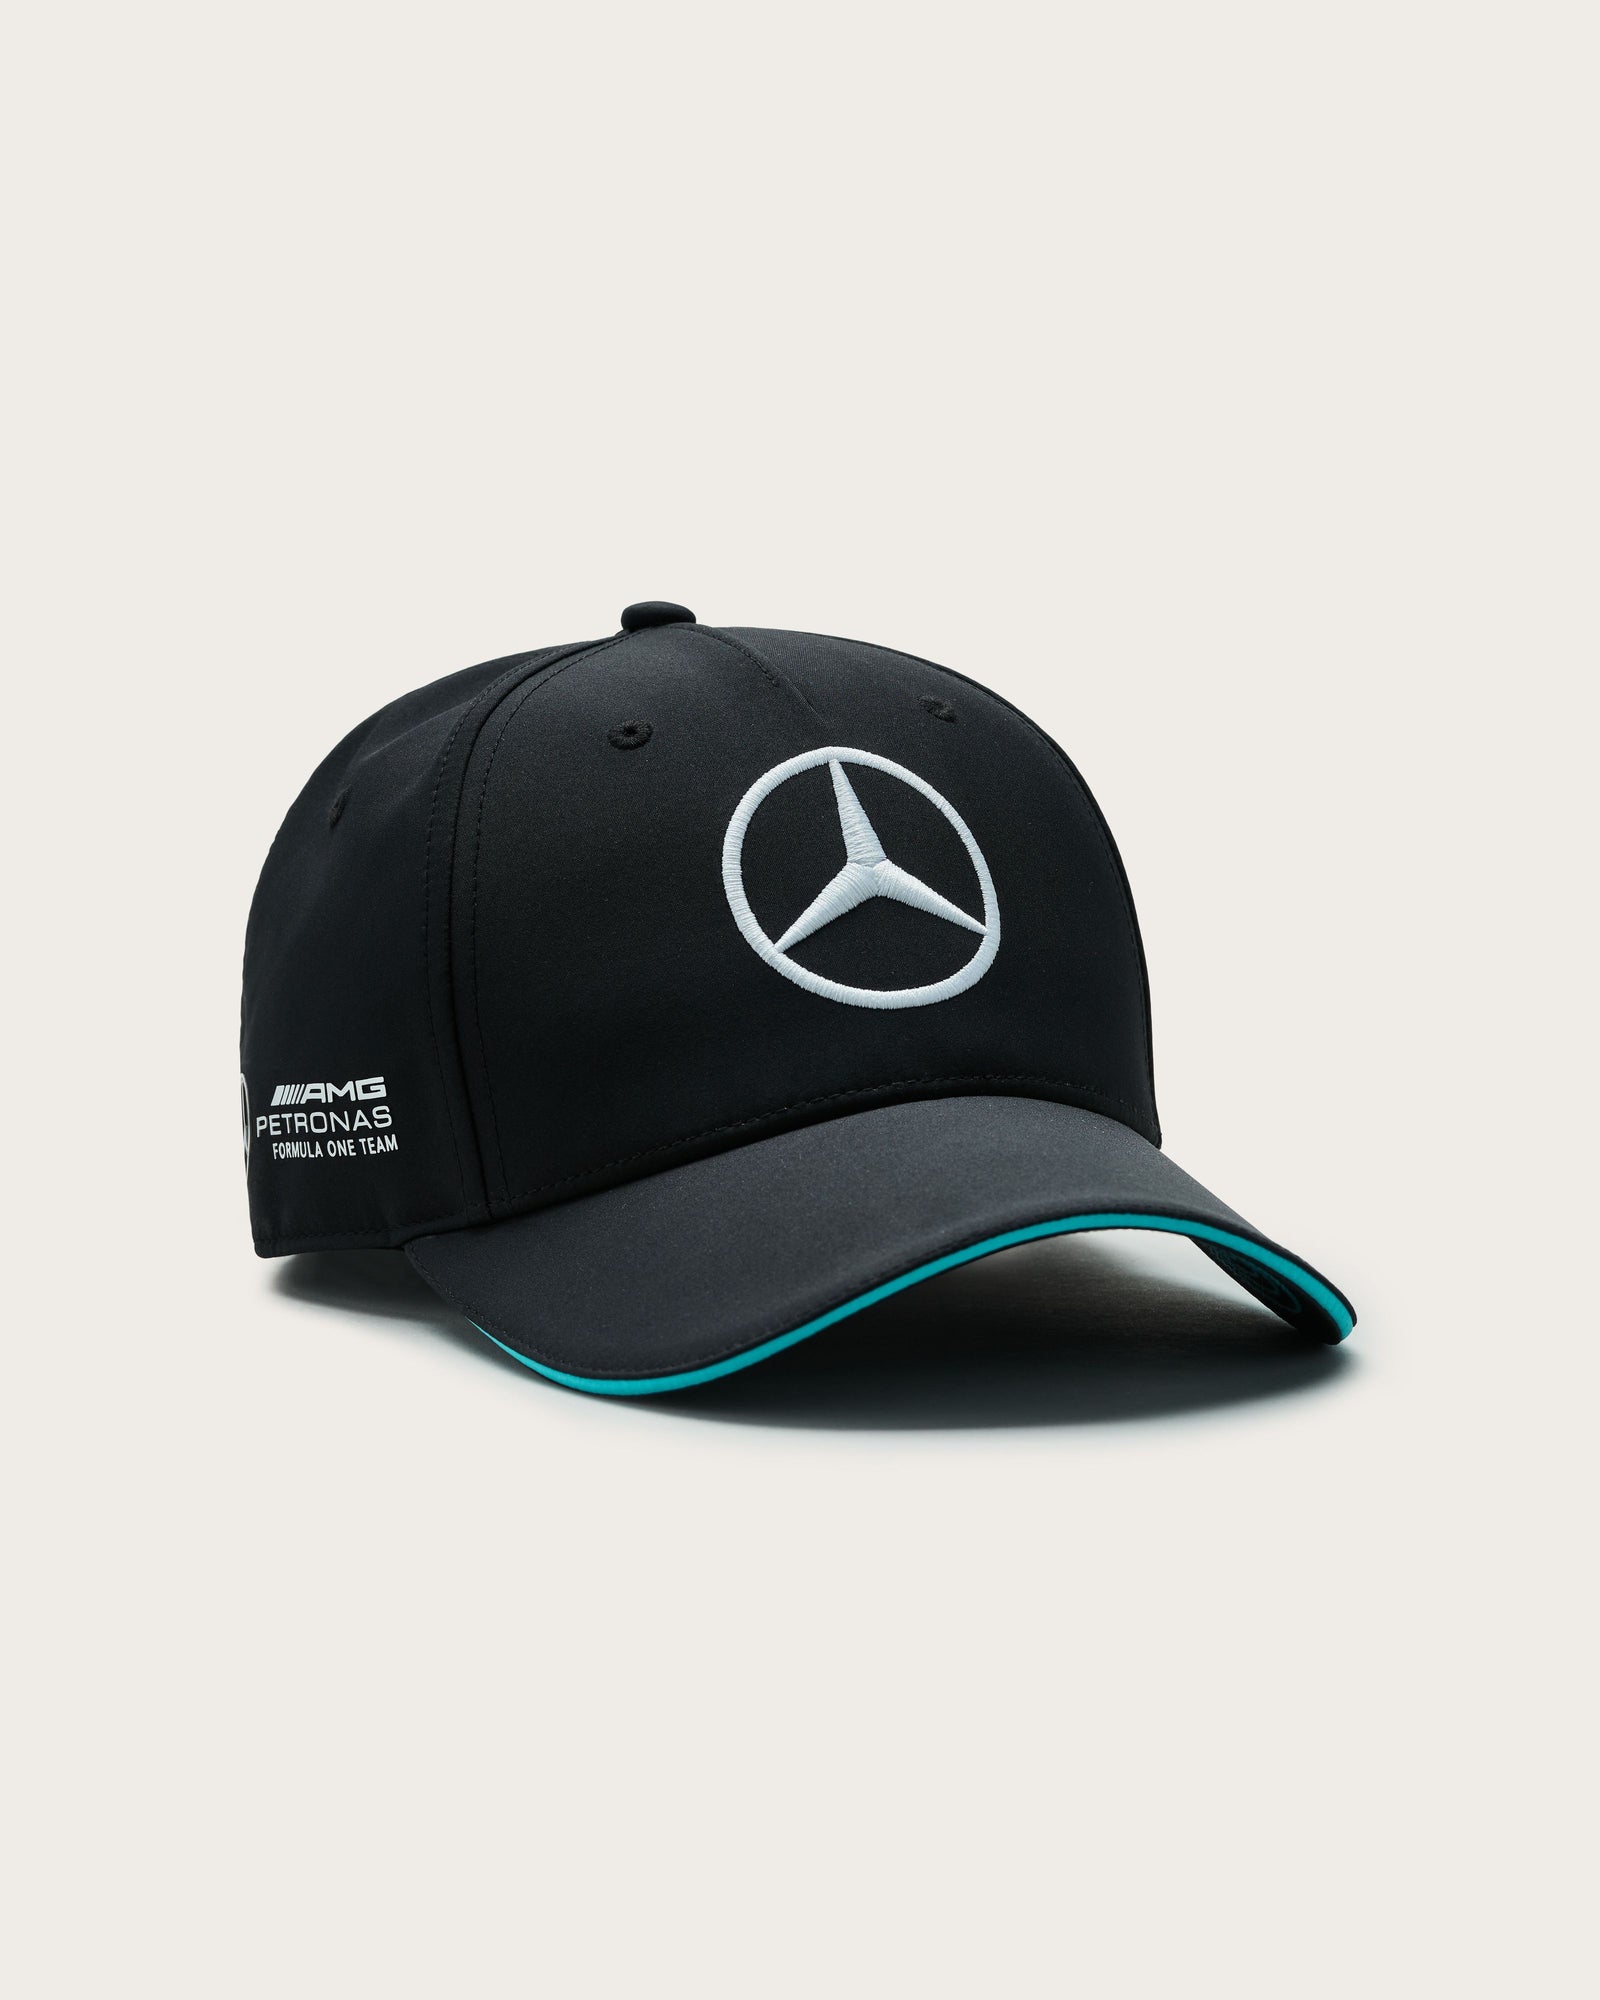 Mercedes F1 & Driver | Official Mercedes-AMG F1 Store